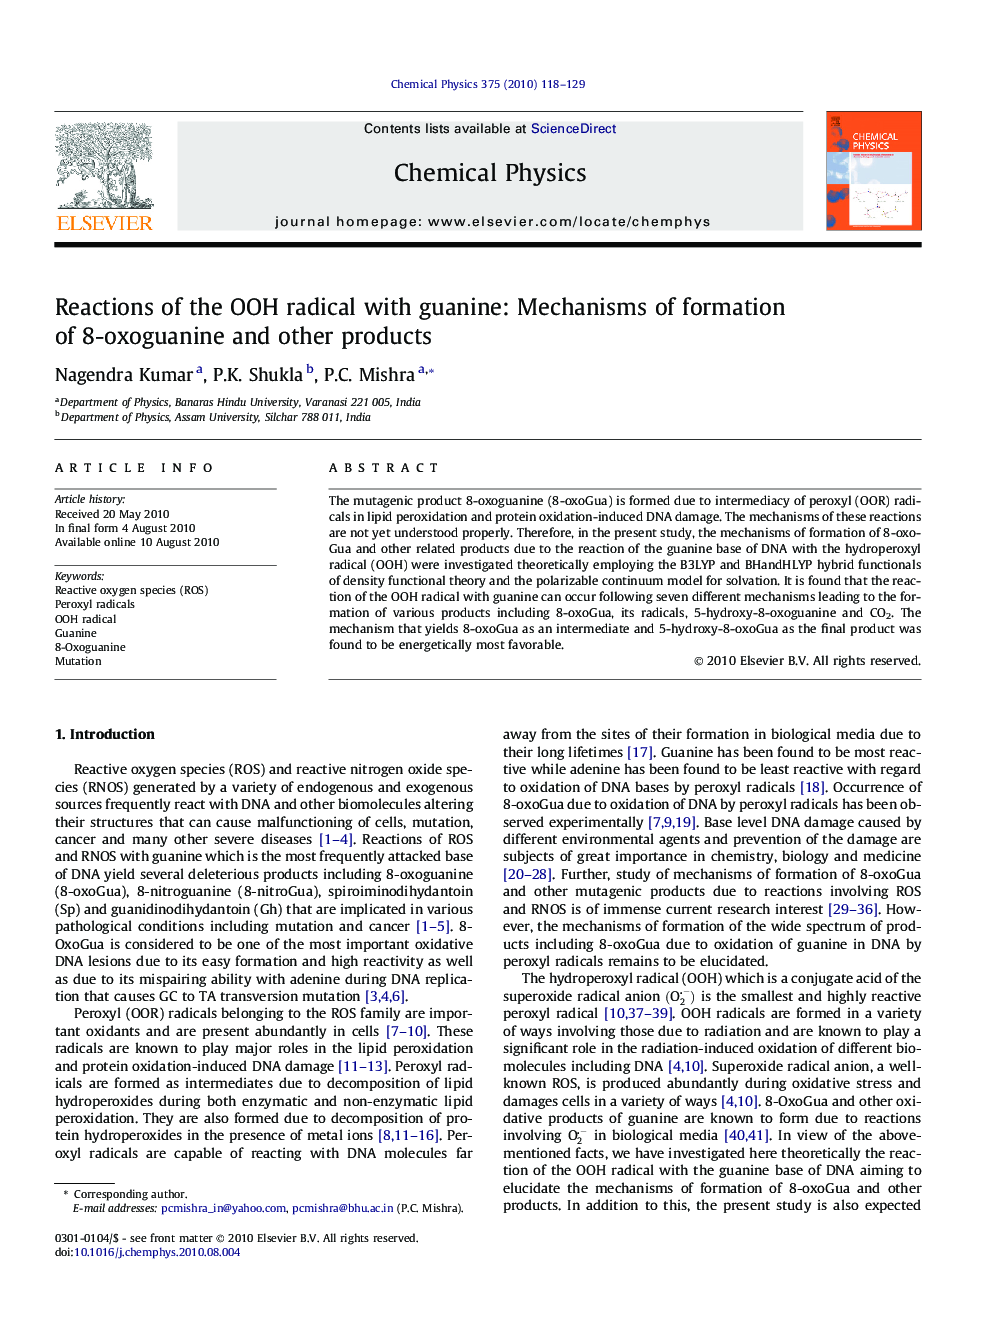 Reactions of the OOH radical with guanine: Mechanisms of formation of 8-oxoguanine and other products